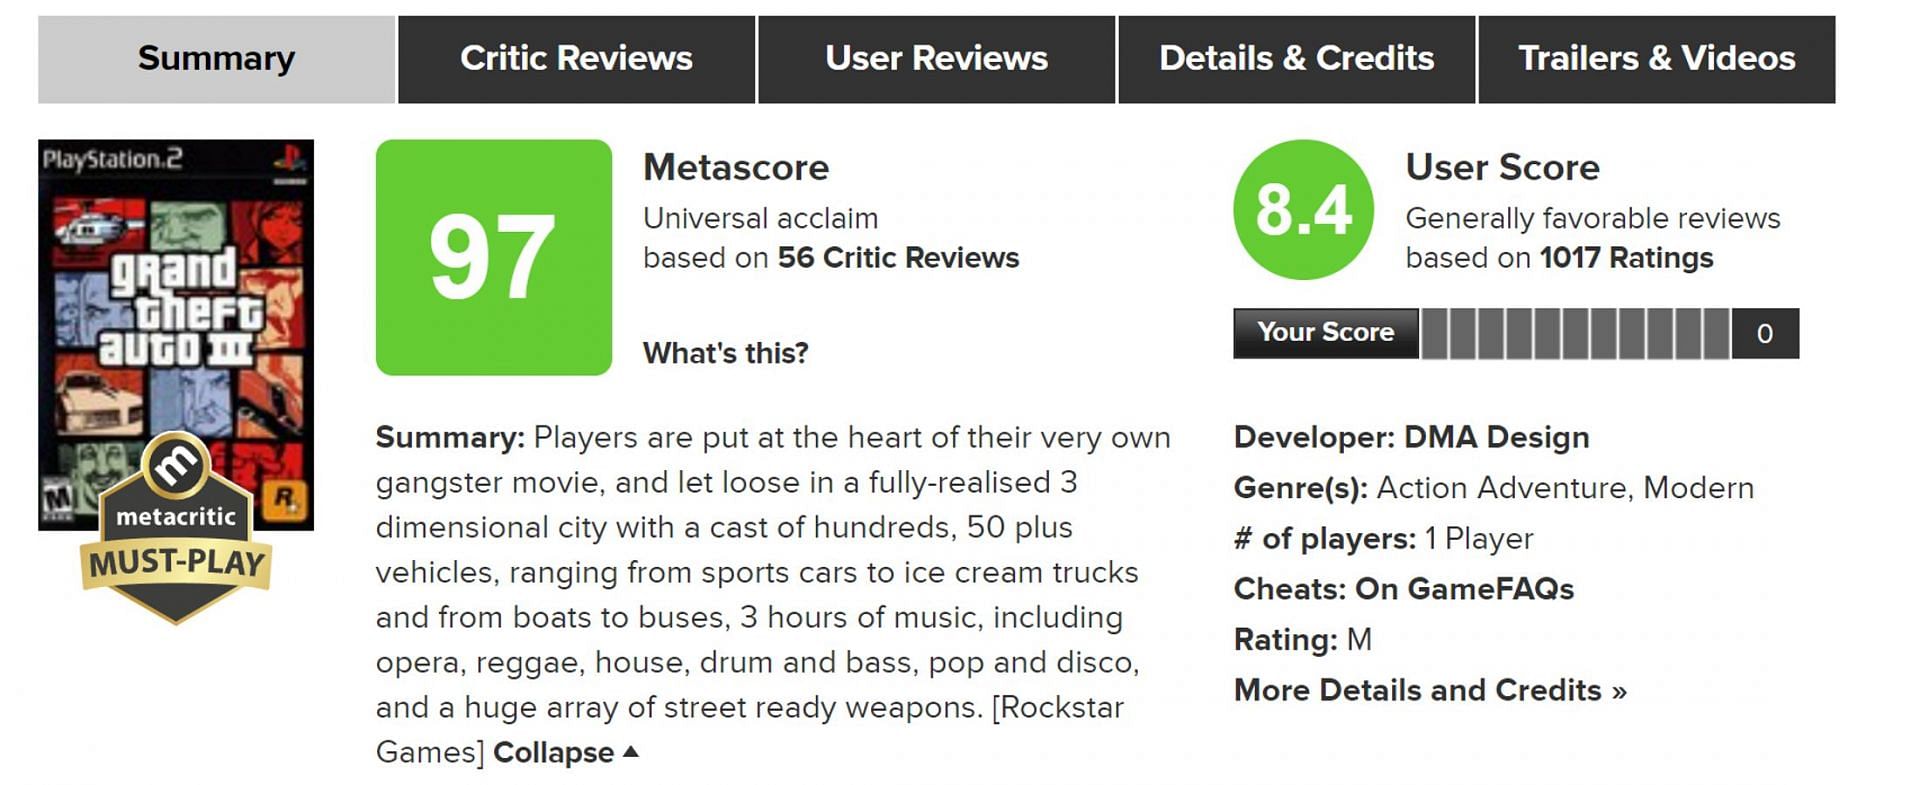 GTA 3 ended up becoming one of the most revolutionary video games of all time (Image via Metacritic)